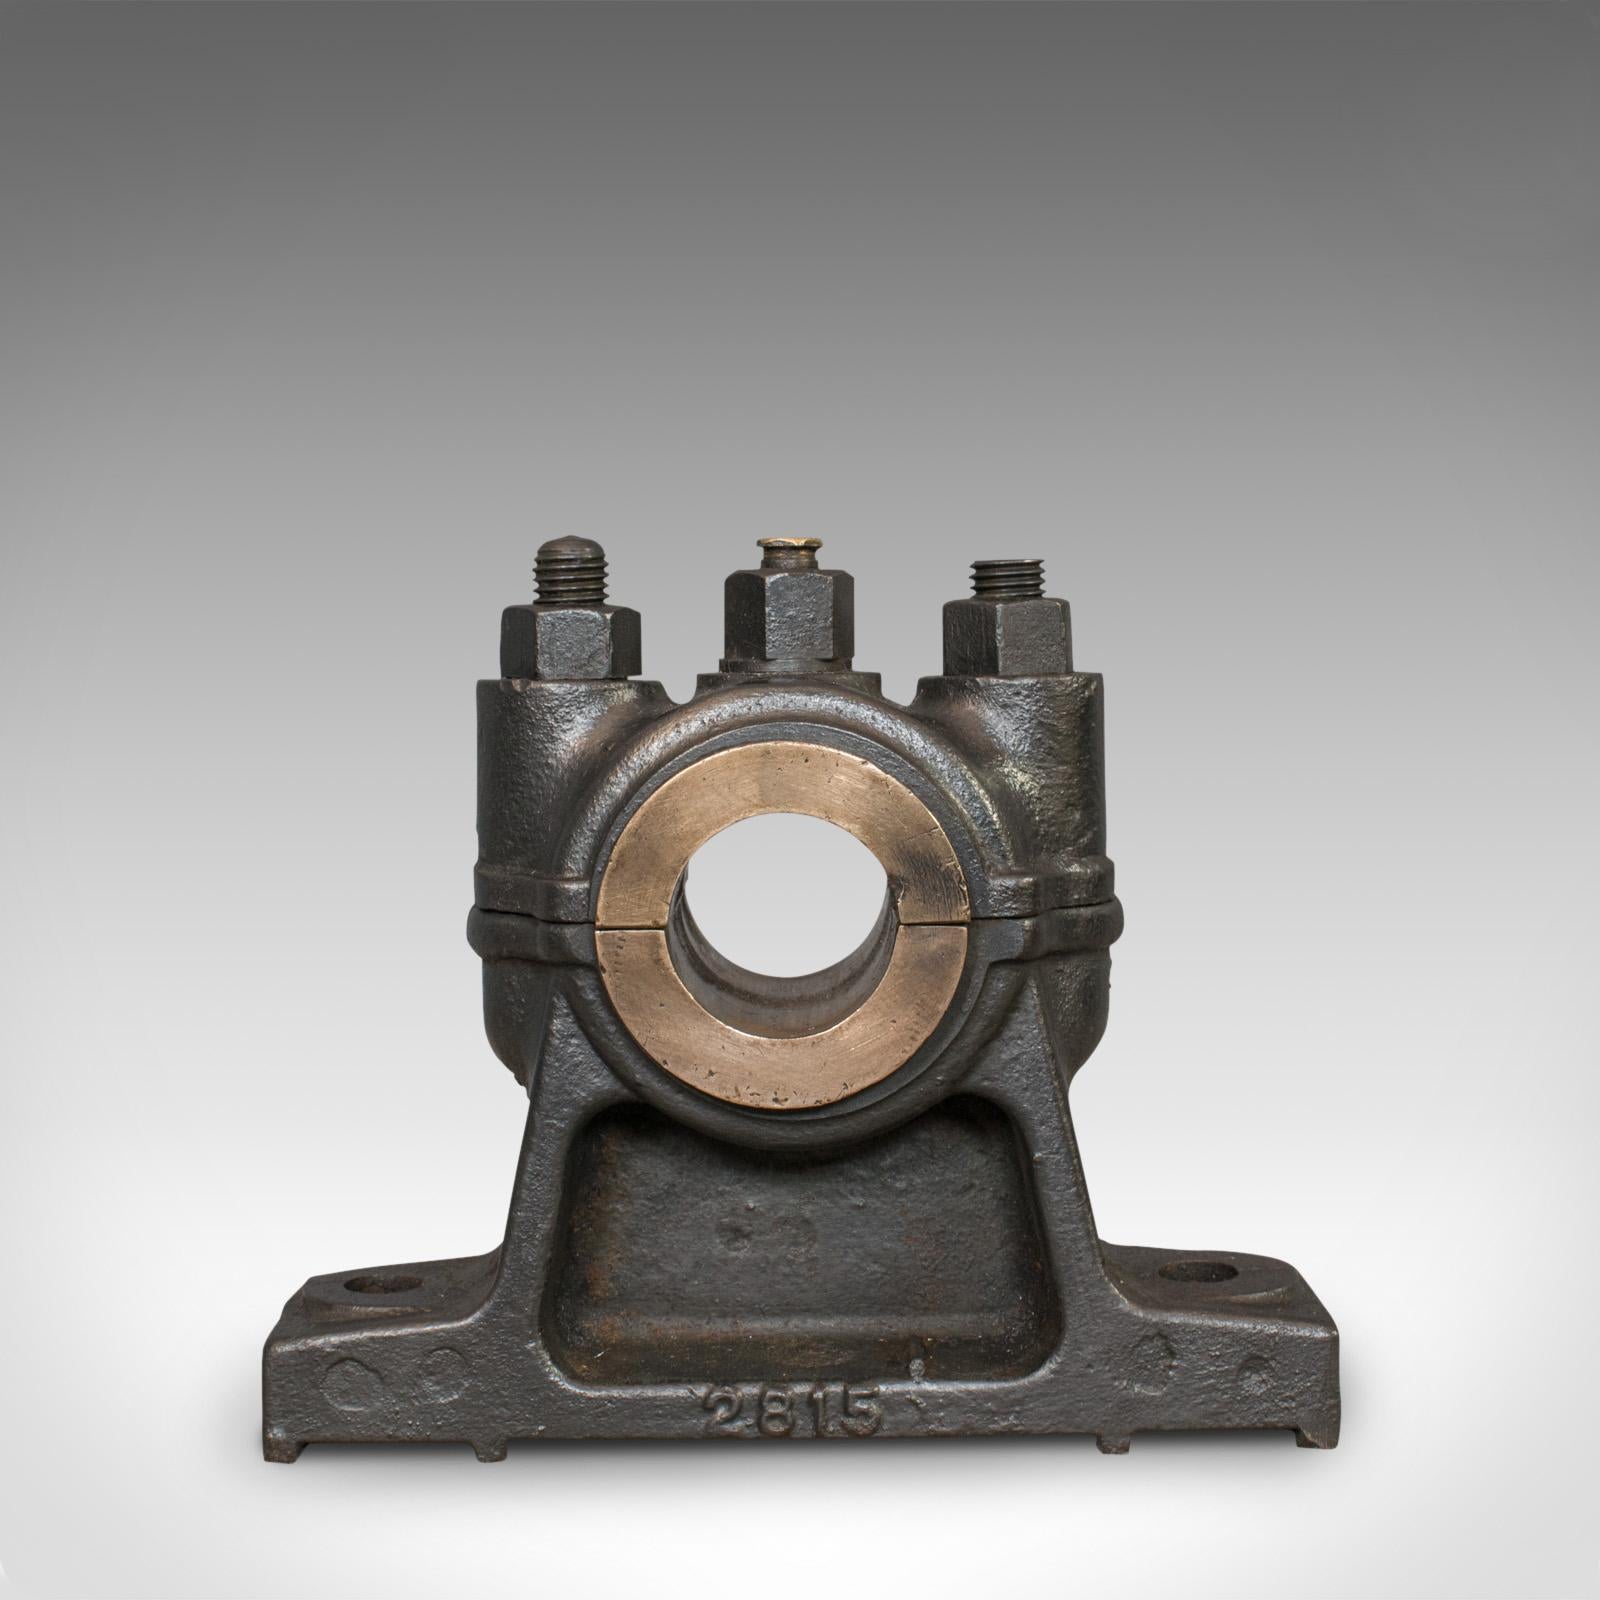 This is an antique engine bearing with graphite finish. An English, cast iron and bronze desk ornament or paperweight, and dating to the Victorian period, circa 1900.

In fine form and of high mechanical interest
Displays a desirable aged